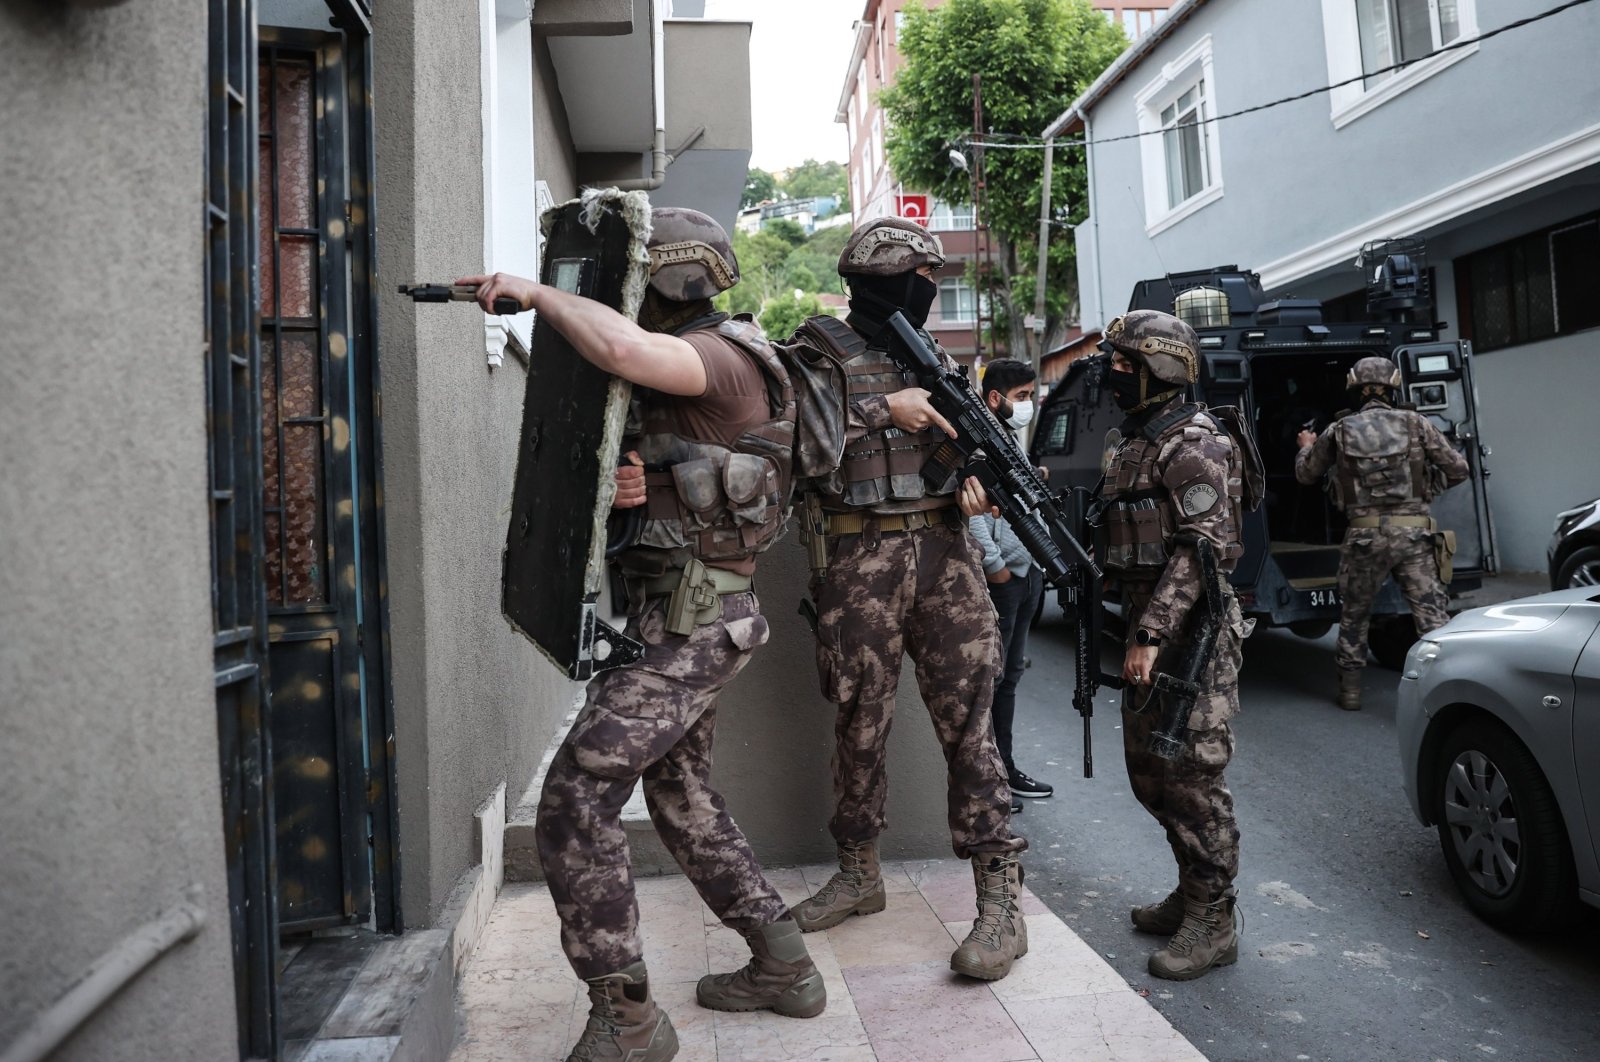 Security forces carry out a counterterrorism operation against Daesh, arresting 18 foreign nationals, Istanbul, Turkey, May 20, 2021. (AA Photo)